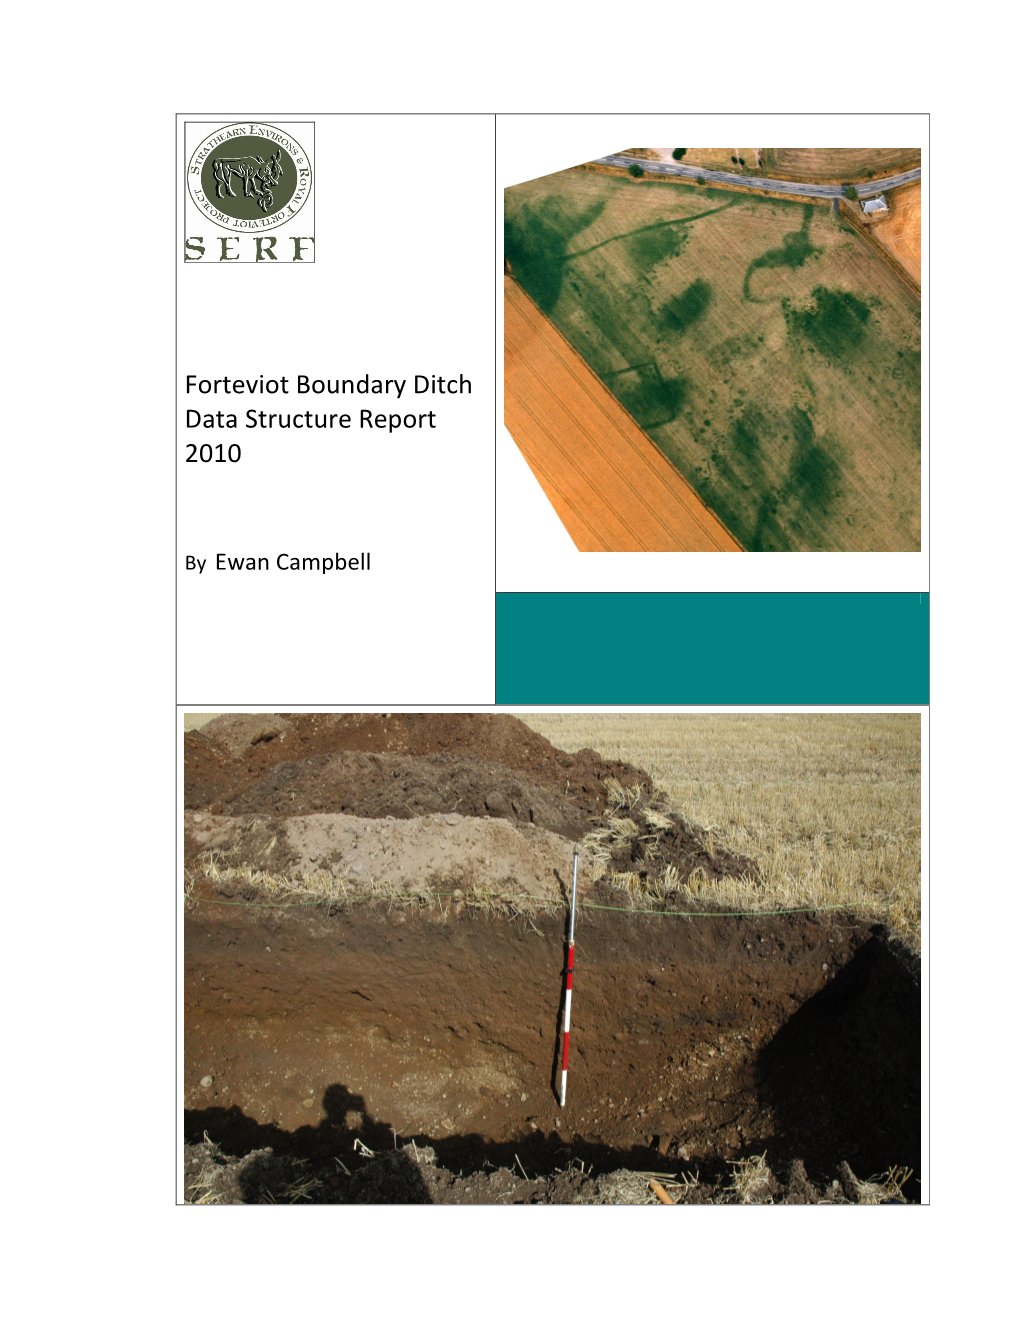 Forteviot Boundary Ditch Data Structure Report 2010